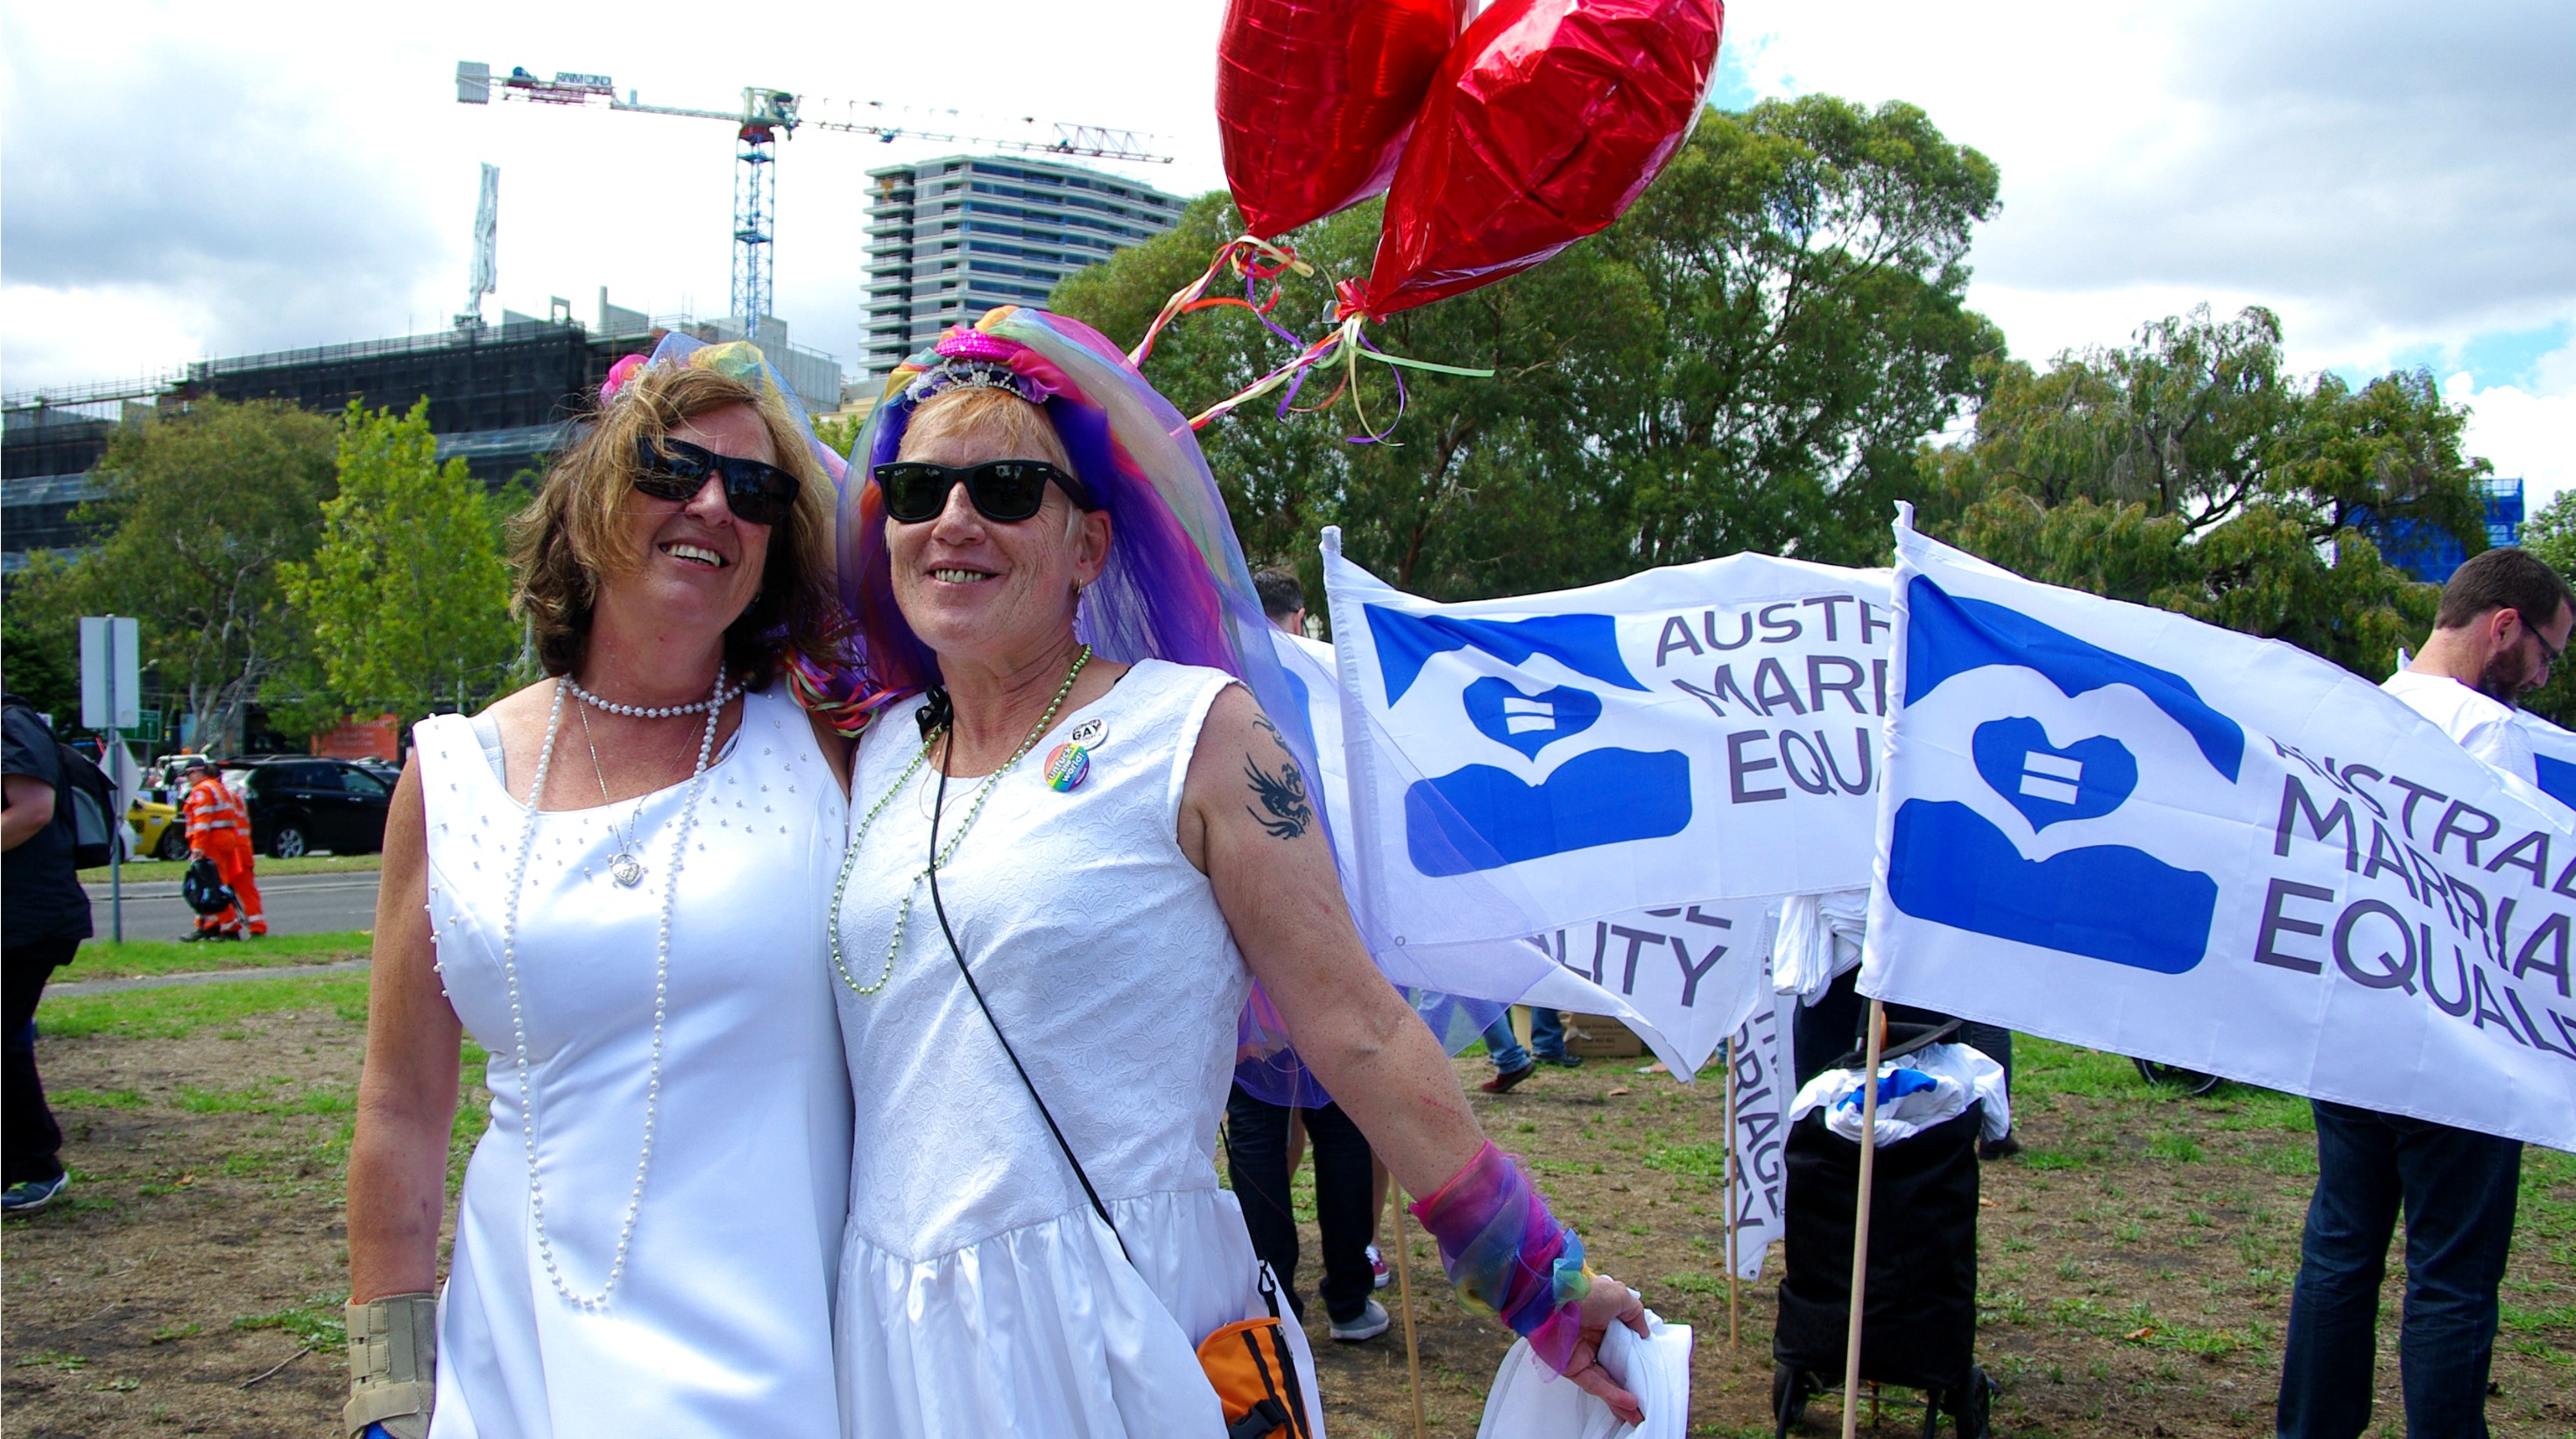 Melbourne’s Pride March sees Opposition Leader in attendance for first time